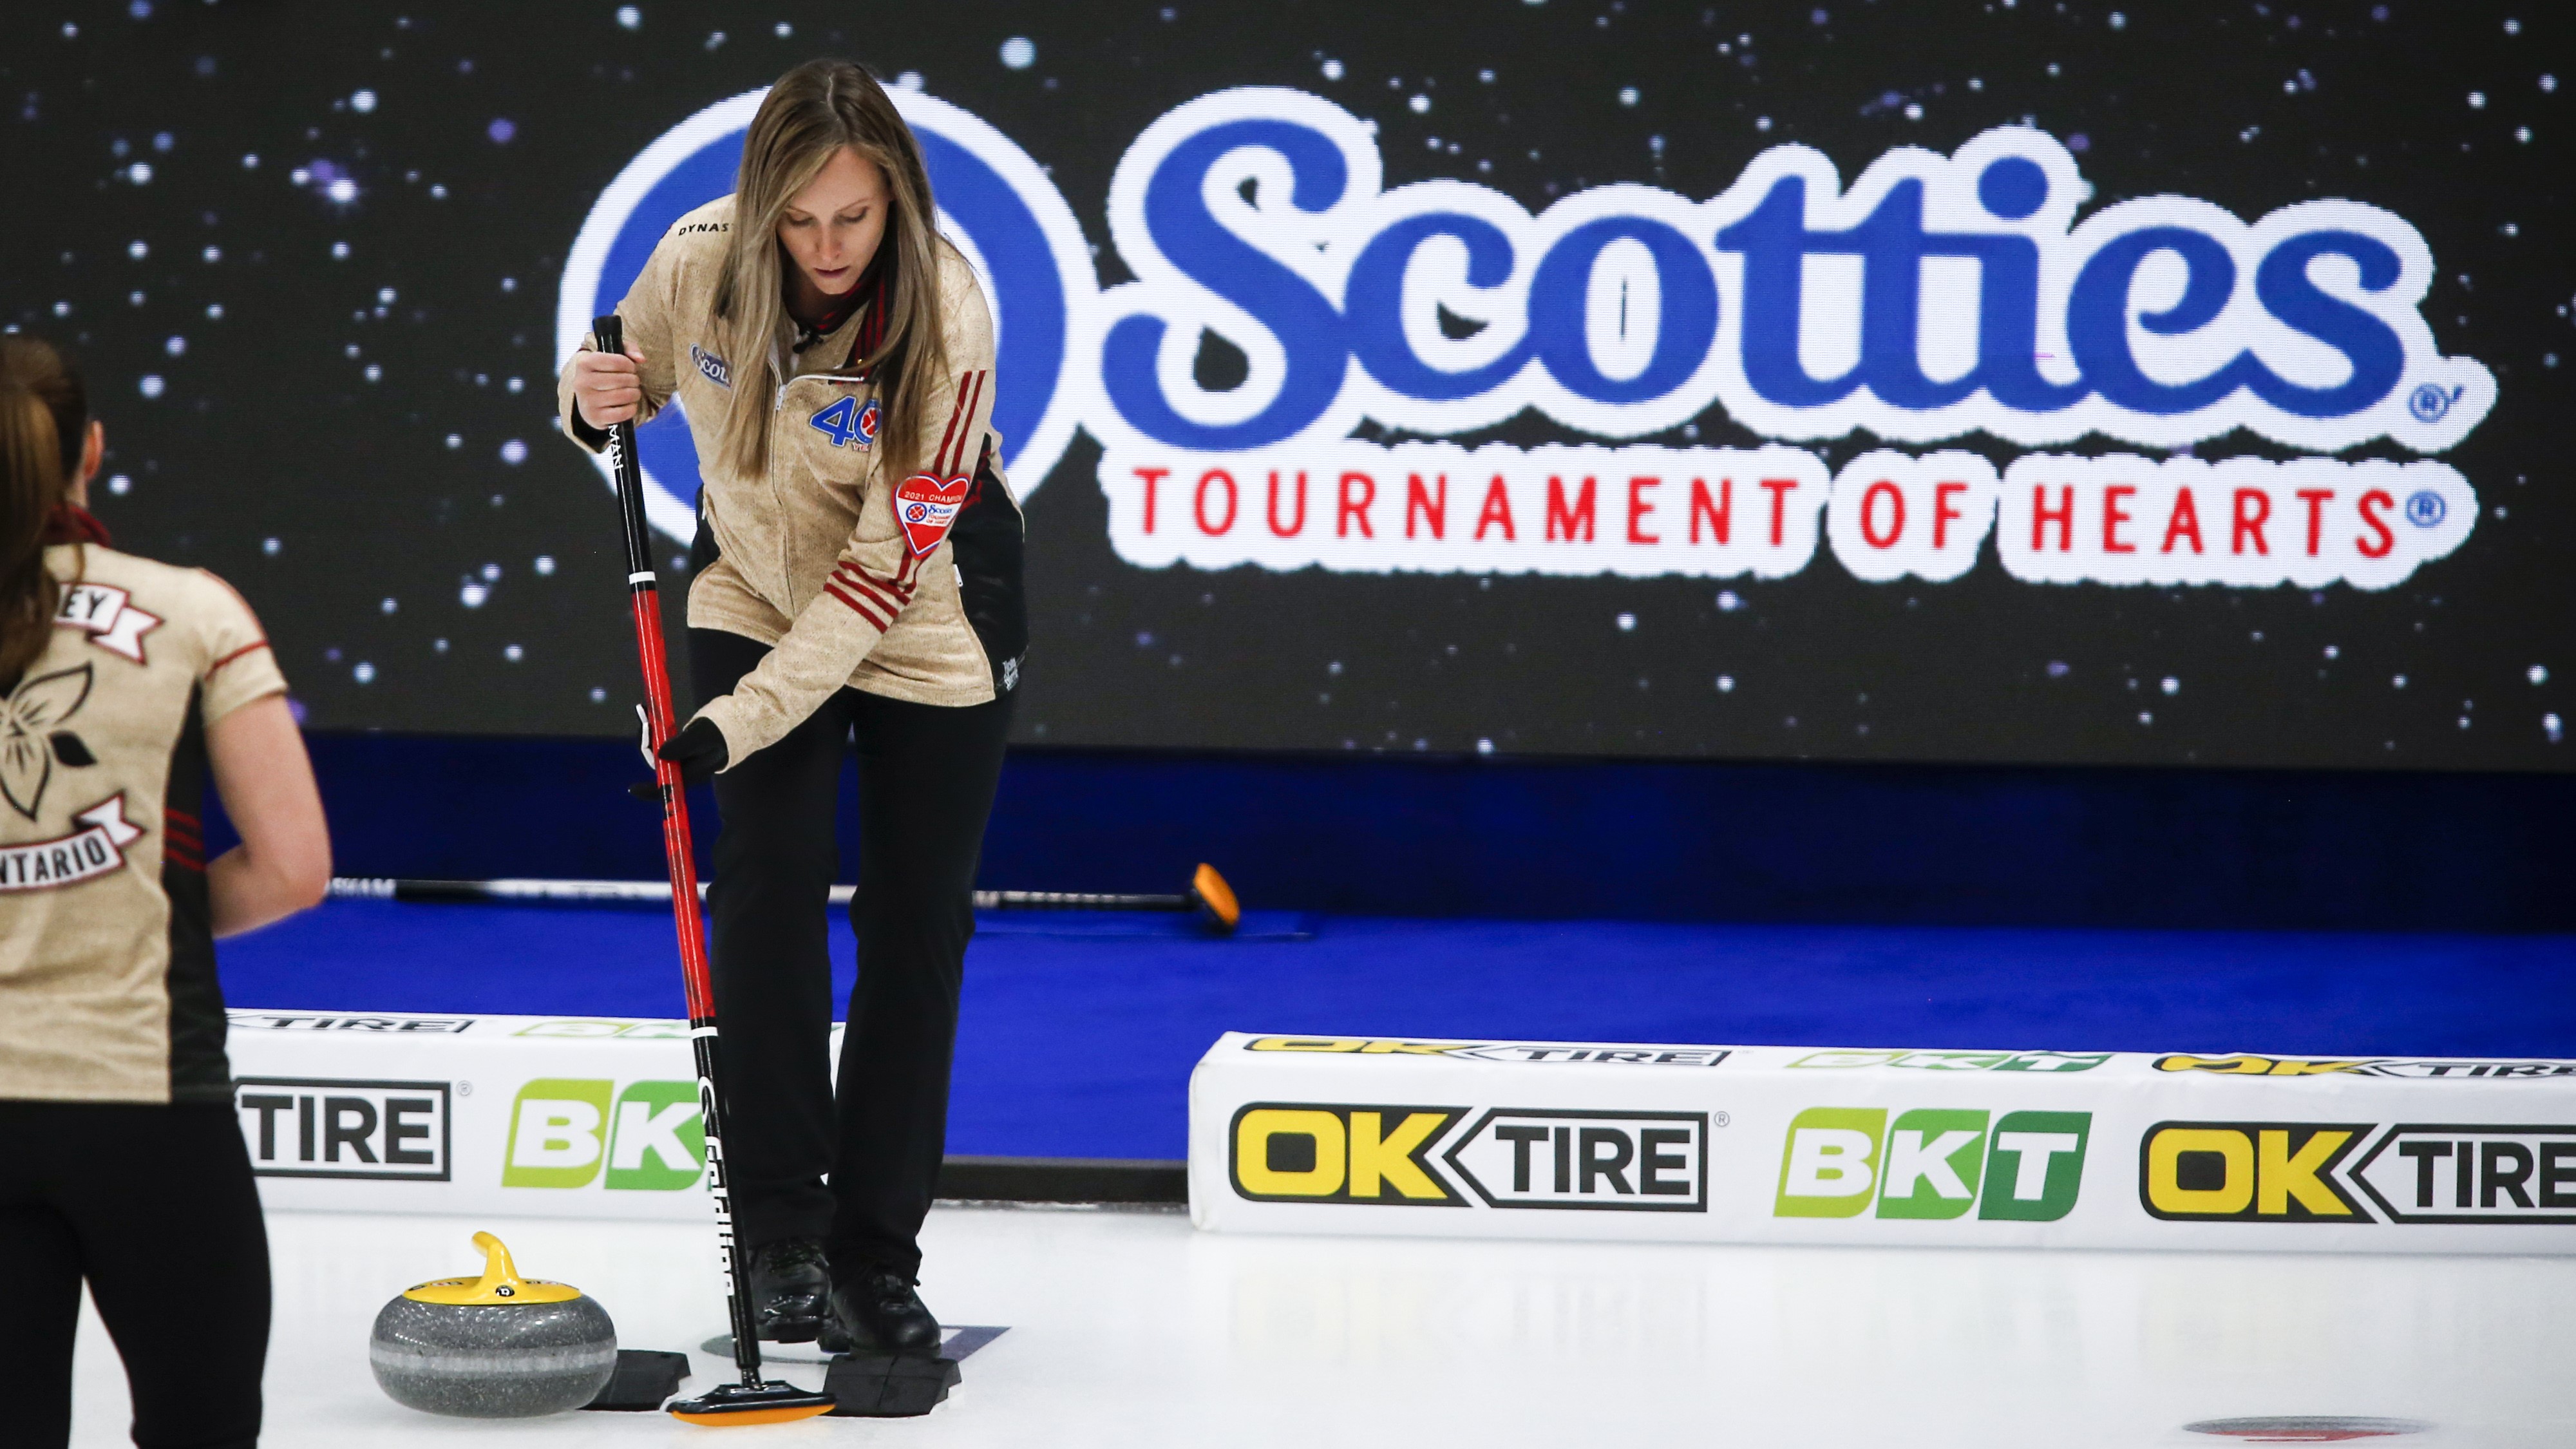 How the Scotties Tournament of Hearts got its enduring name